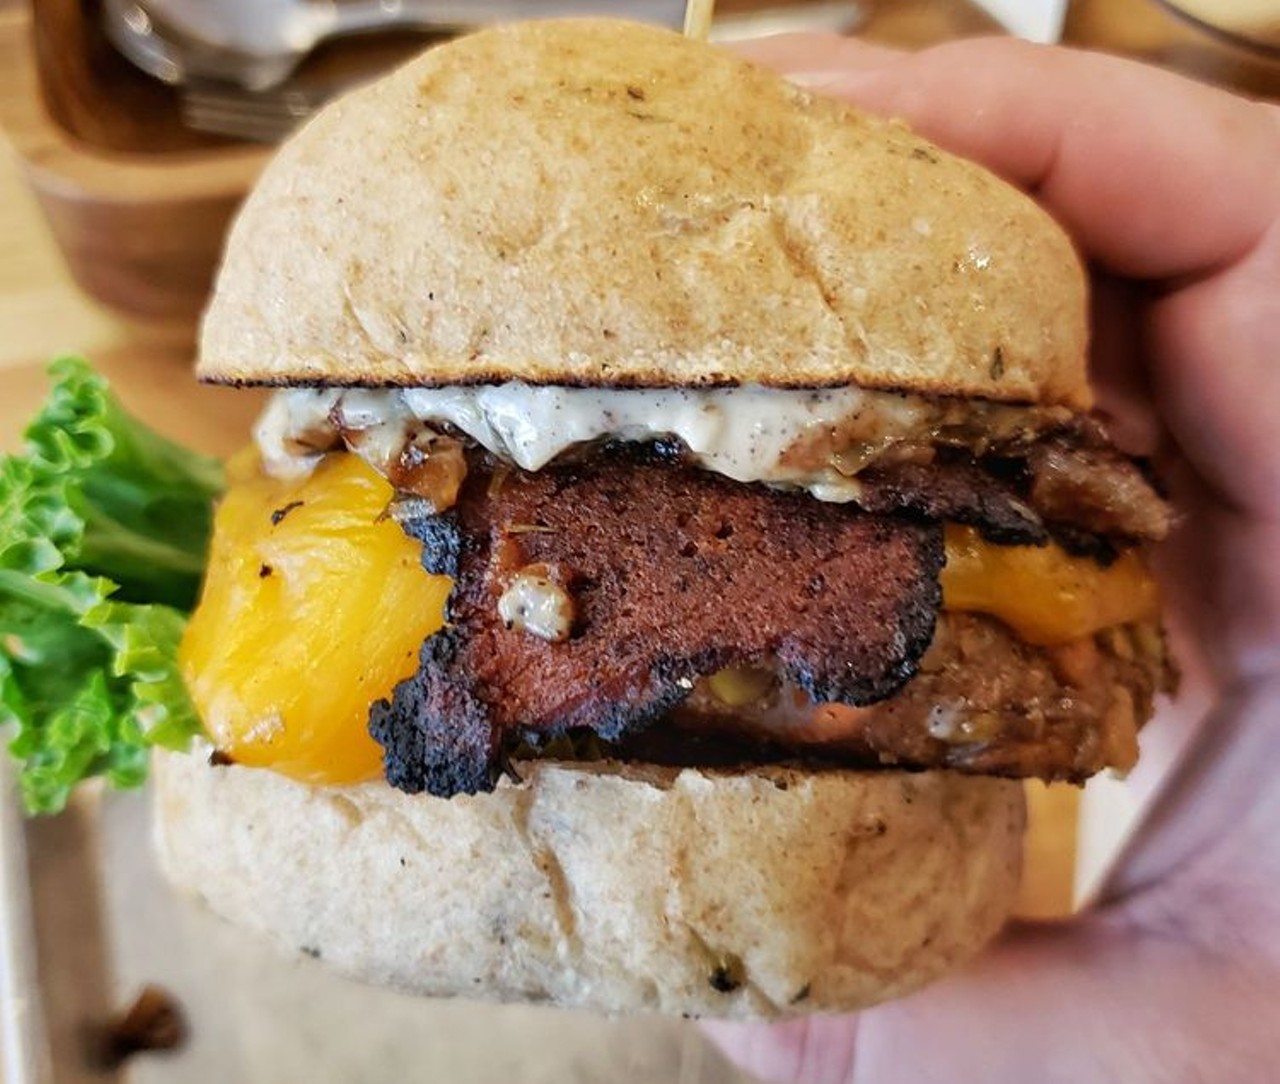 #5: SweetArt
(2203 South 39th Street; 314-771-4278)
Specializing in veggie burgers, read the Yelp reviews here.
Find out more from our food editor Cheryl Baehr here.
Photo credit: Jason P. via Yelp